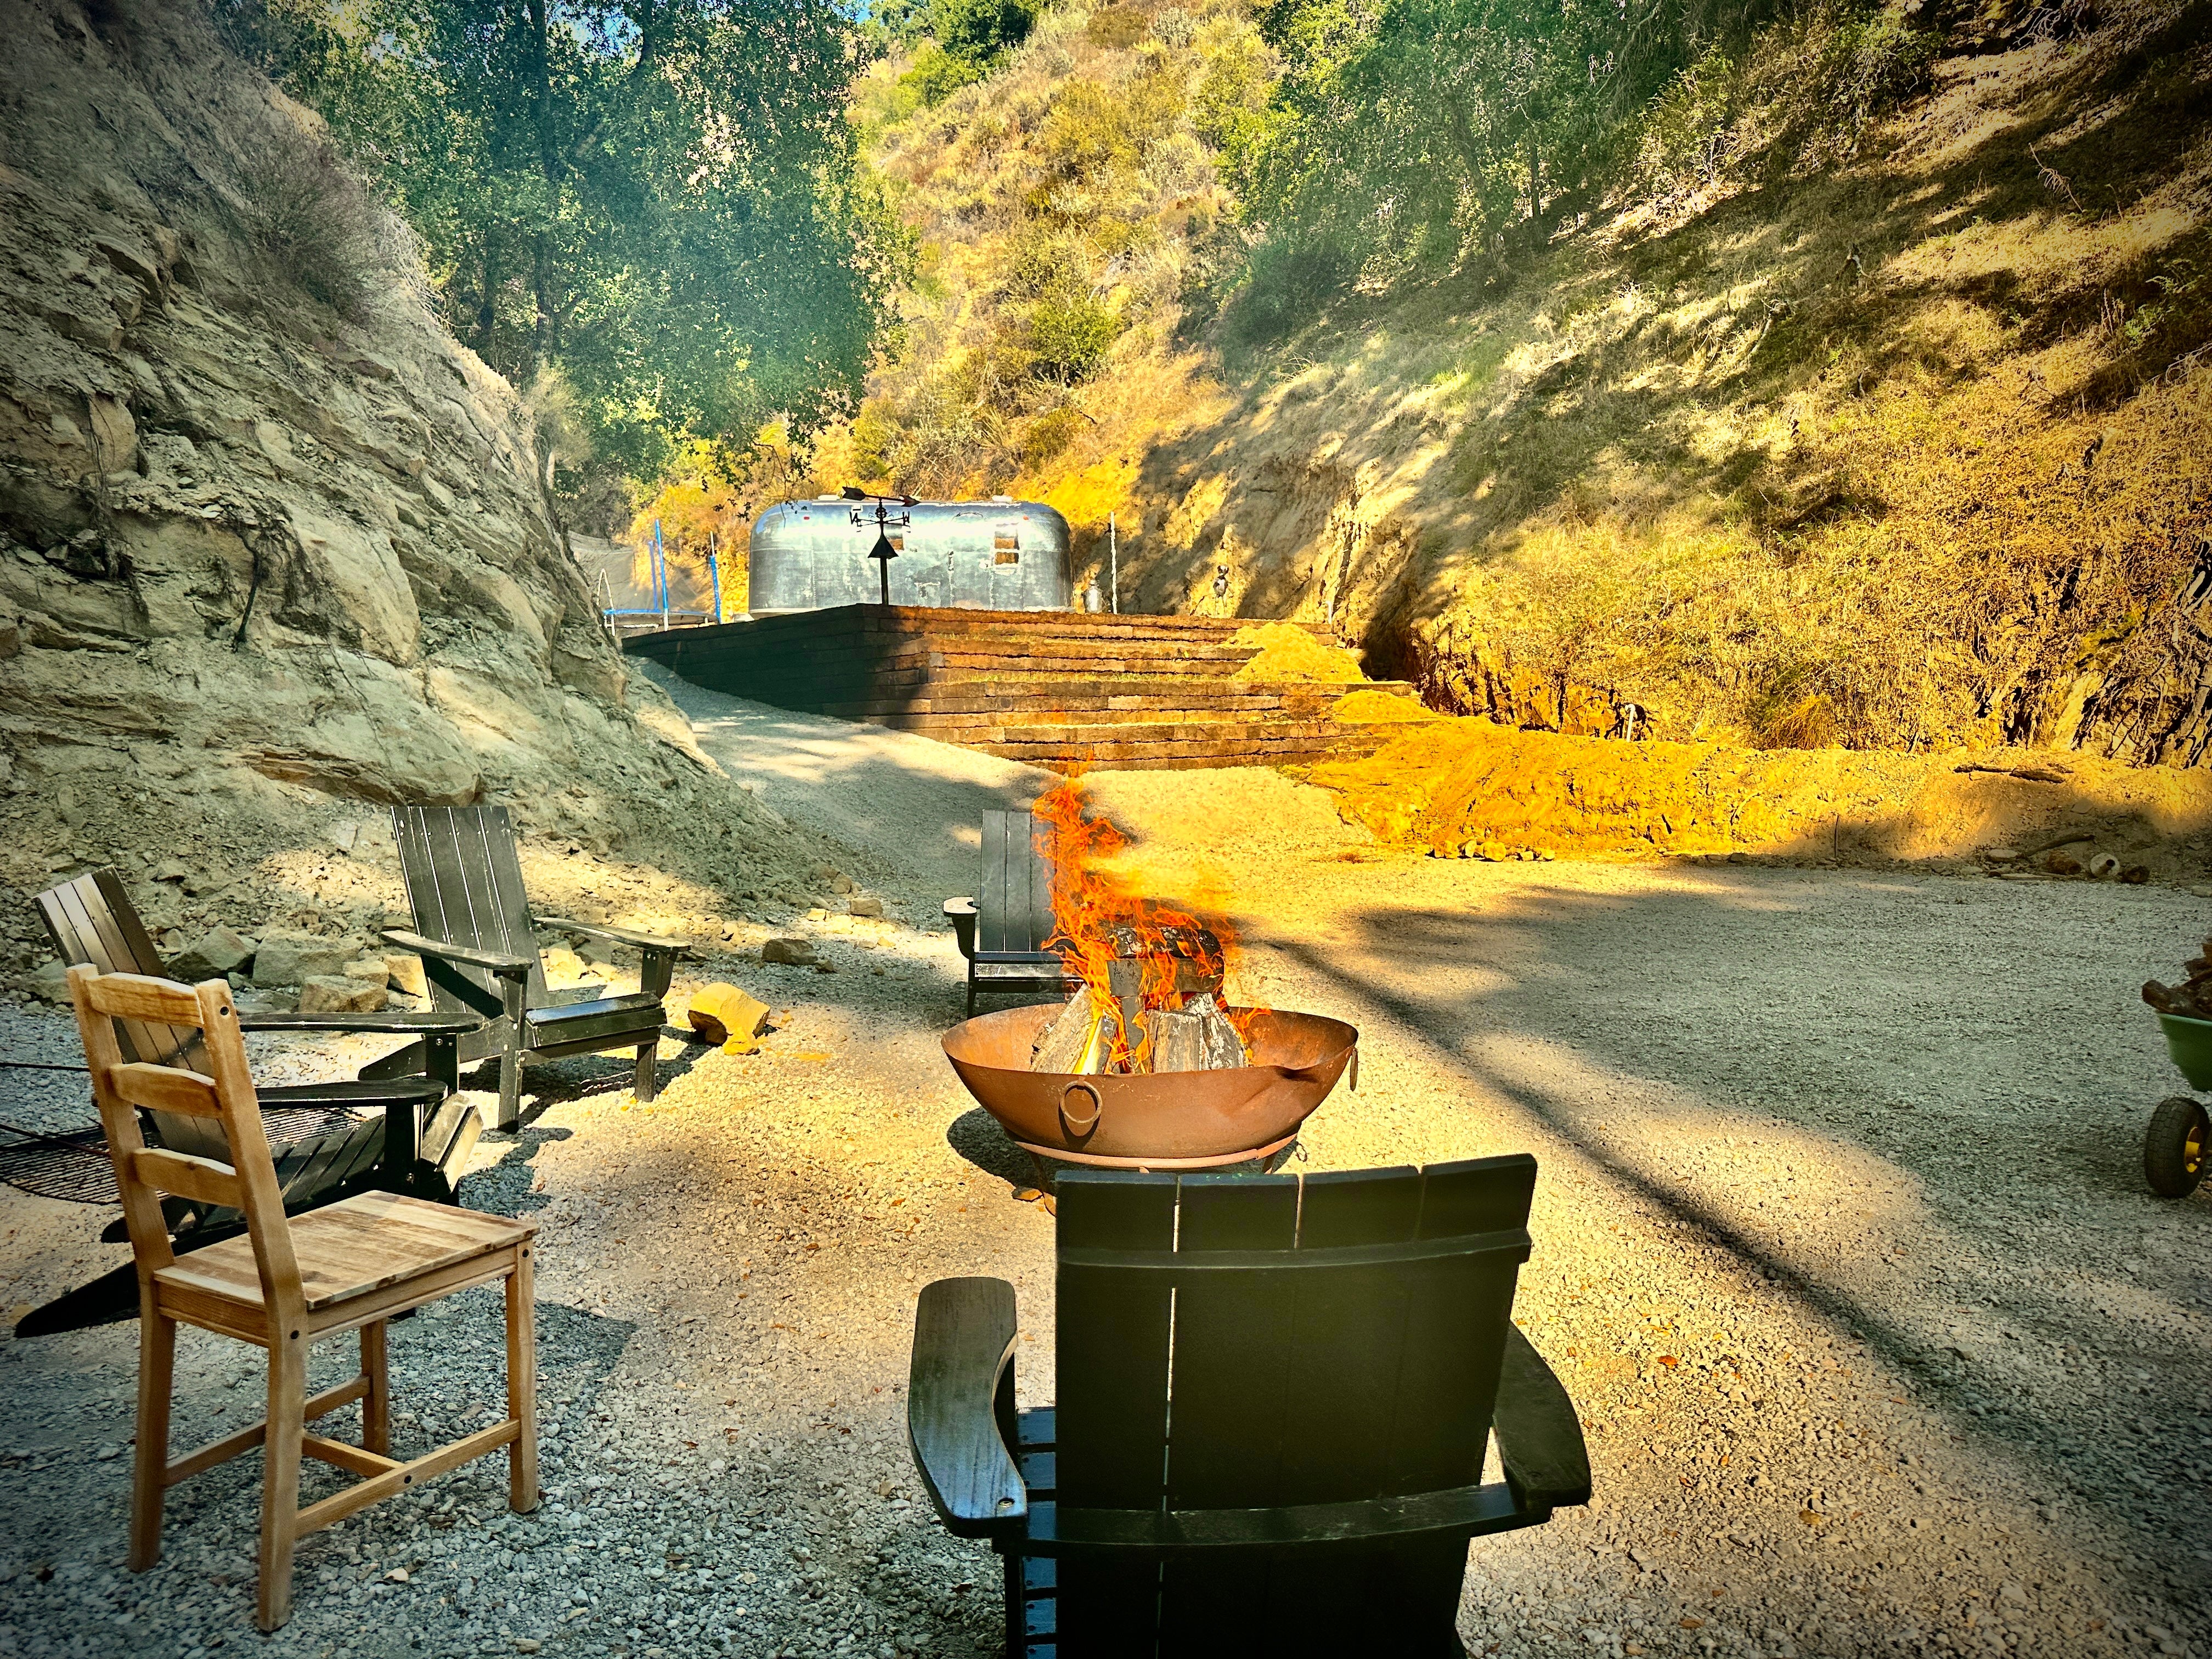 Camper submitted image from Malibu Creek Orchard Retreat - 2